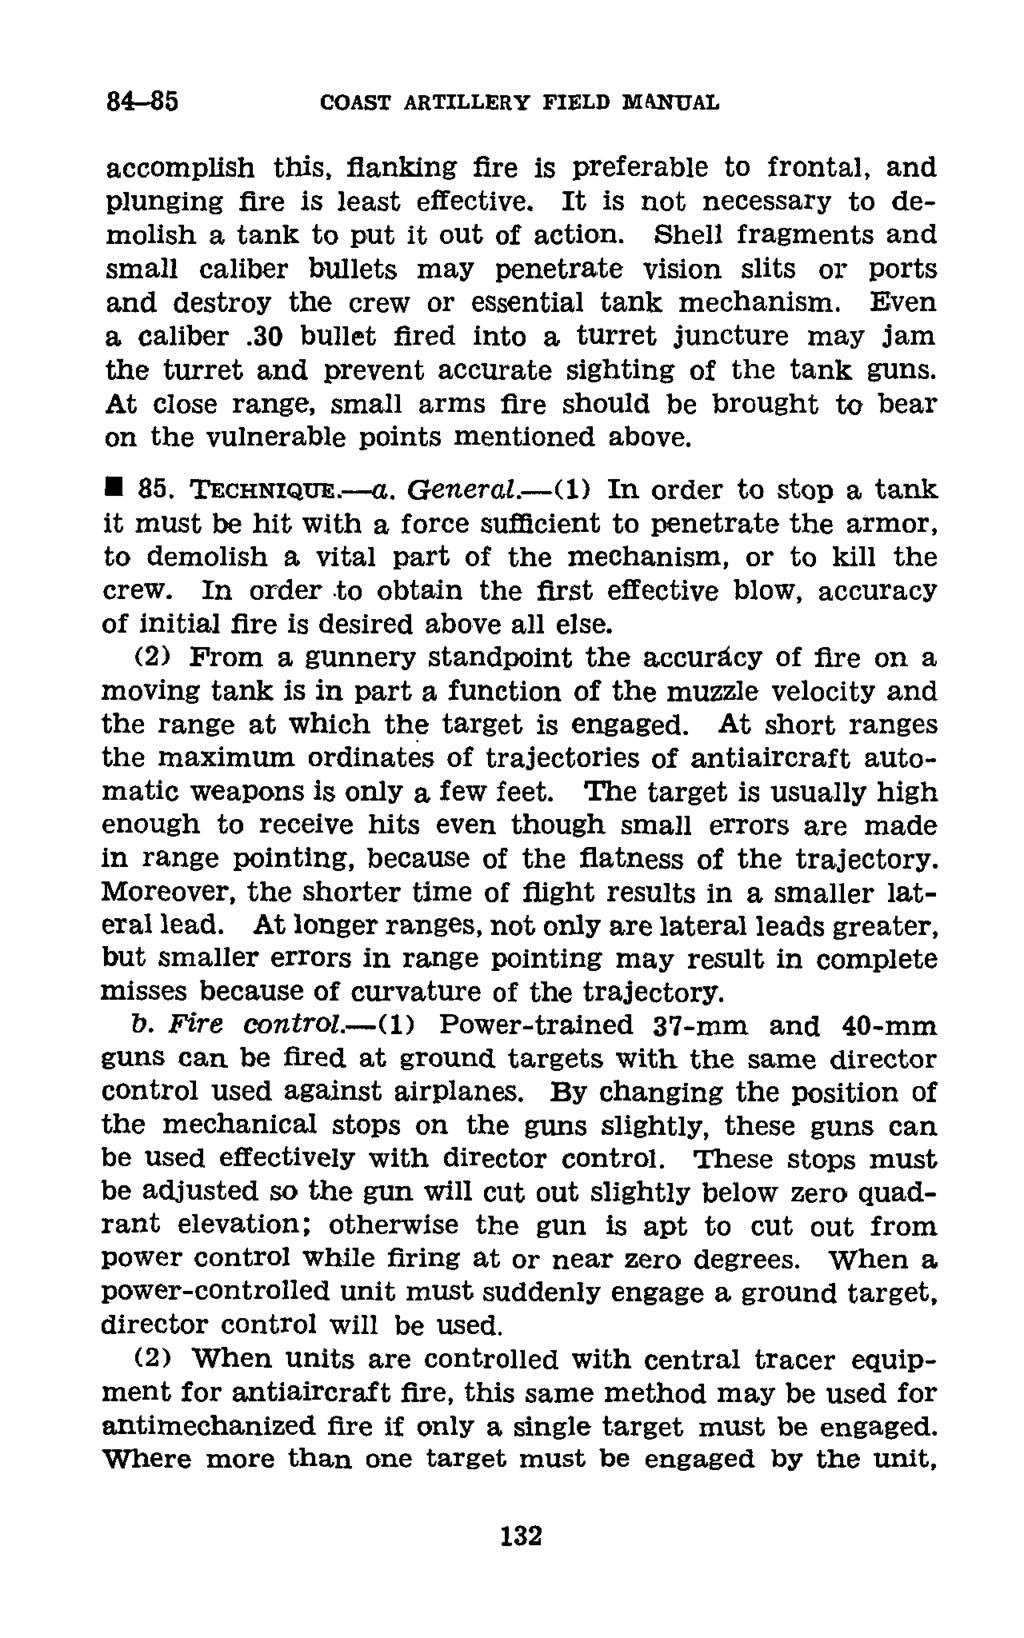 84-85 COAST ARTILLERY FIELD MANUAL accomplish this, flanking fire is preferable to frontal, and plunging fire is least effective. It is not necessary to demolish a tank to put it out of action.